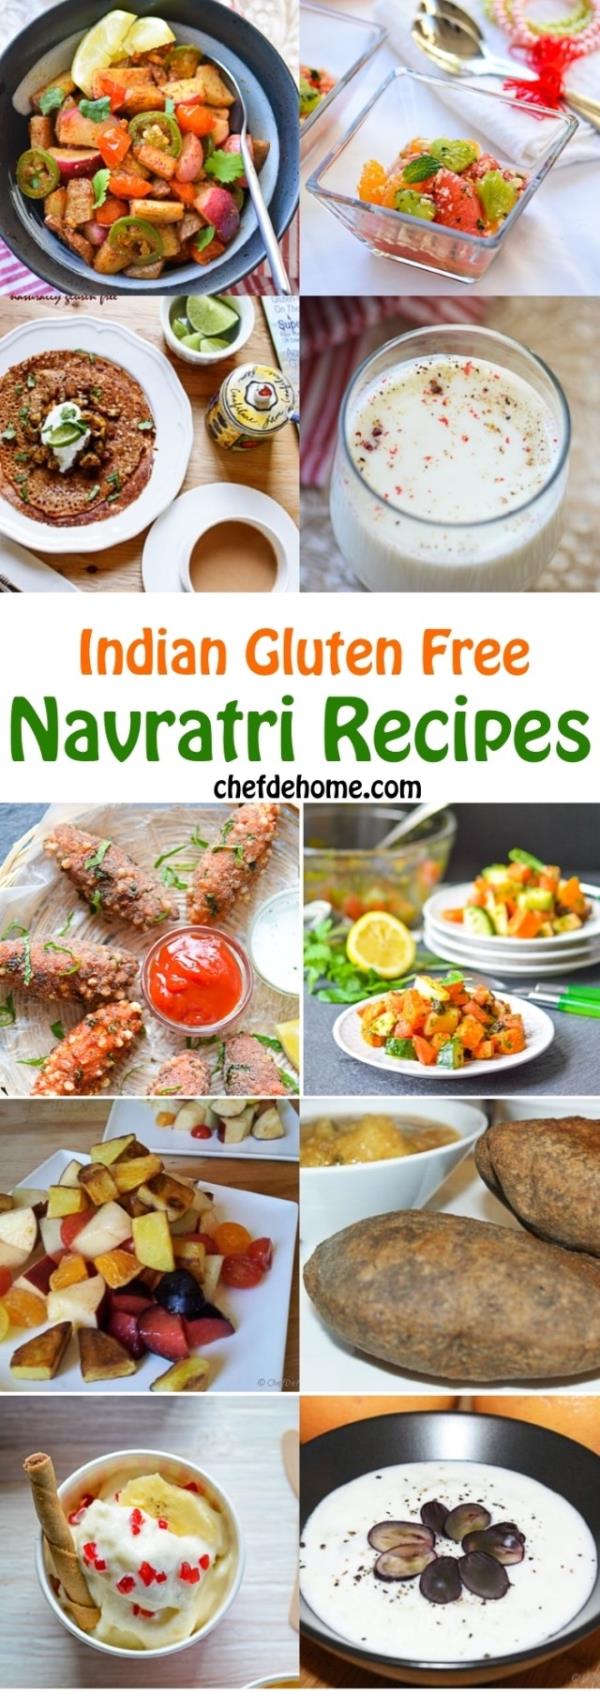 Indian Navratri Fasts Gluten Free Recipes Round Up Meals - ChefDeHome.com